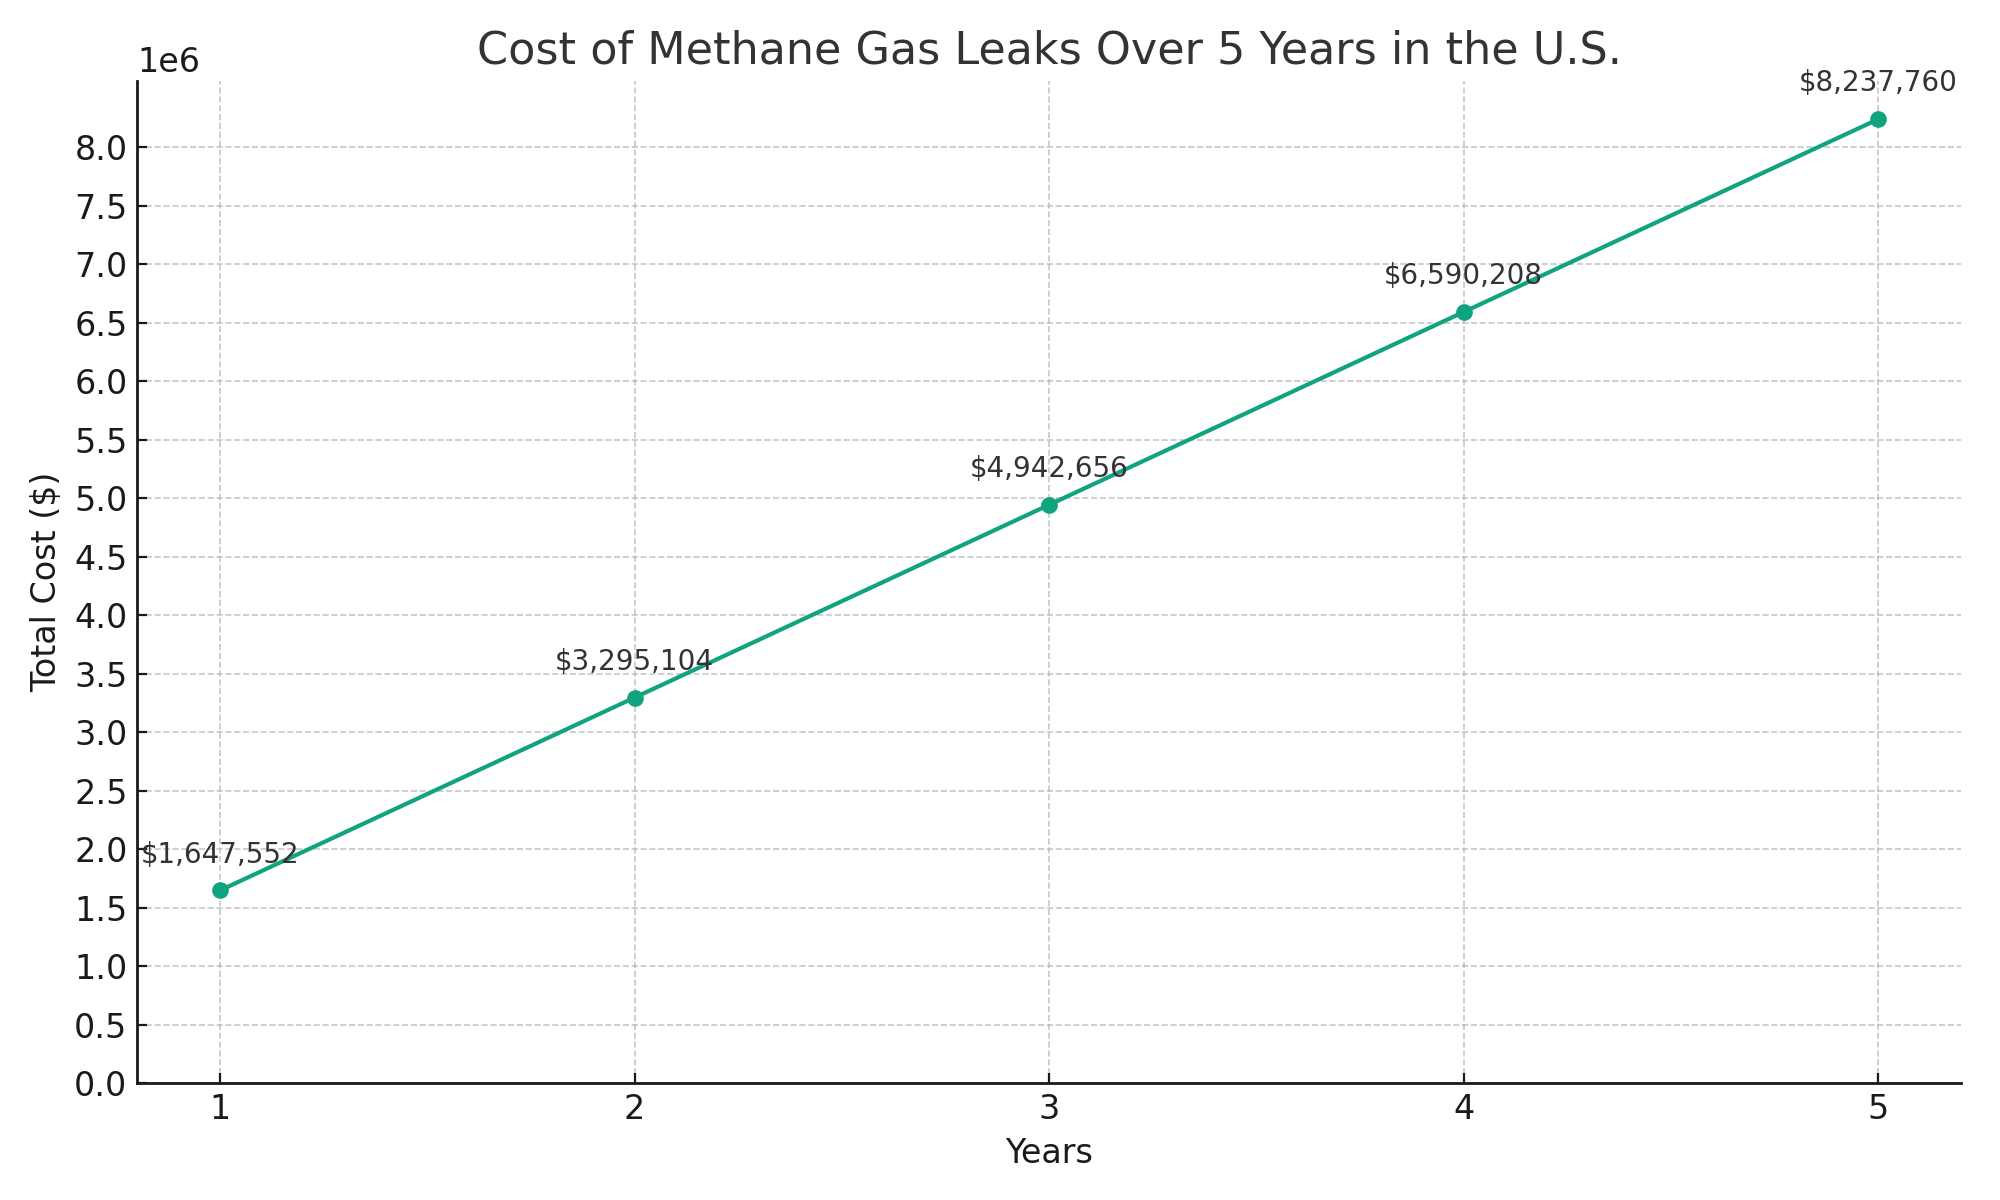 methane gas leaks cost In us over 5 years